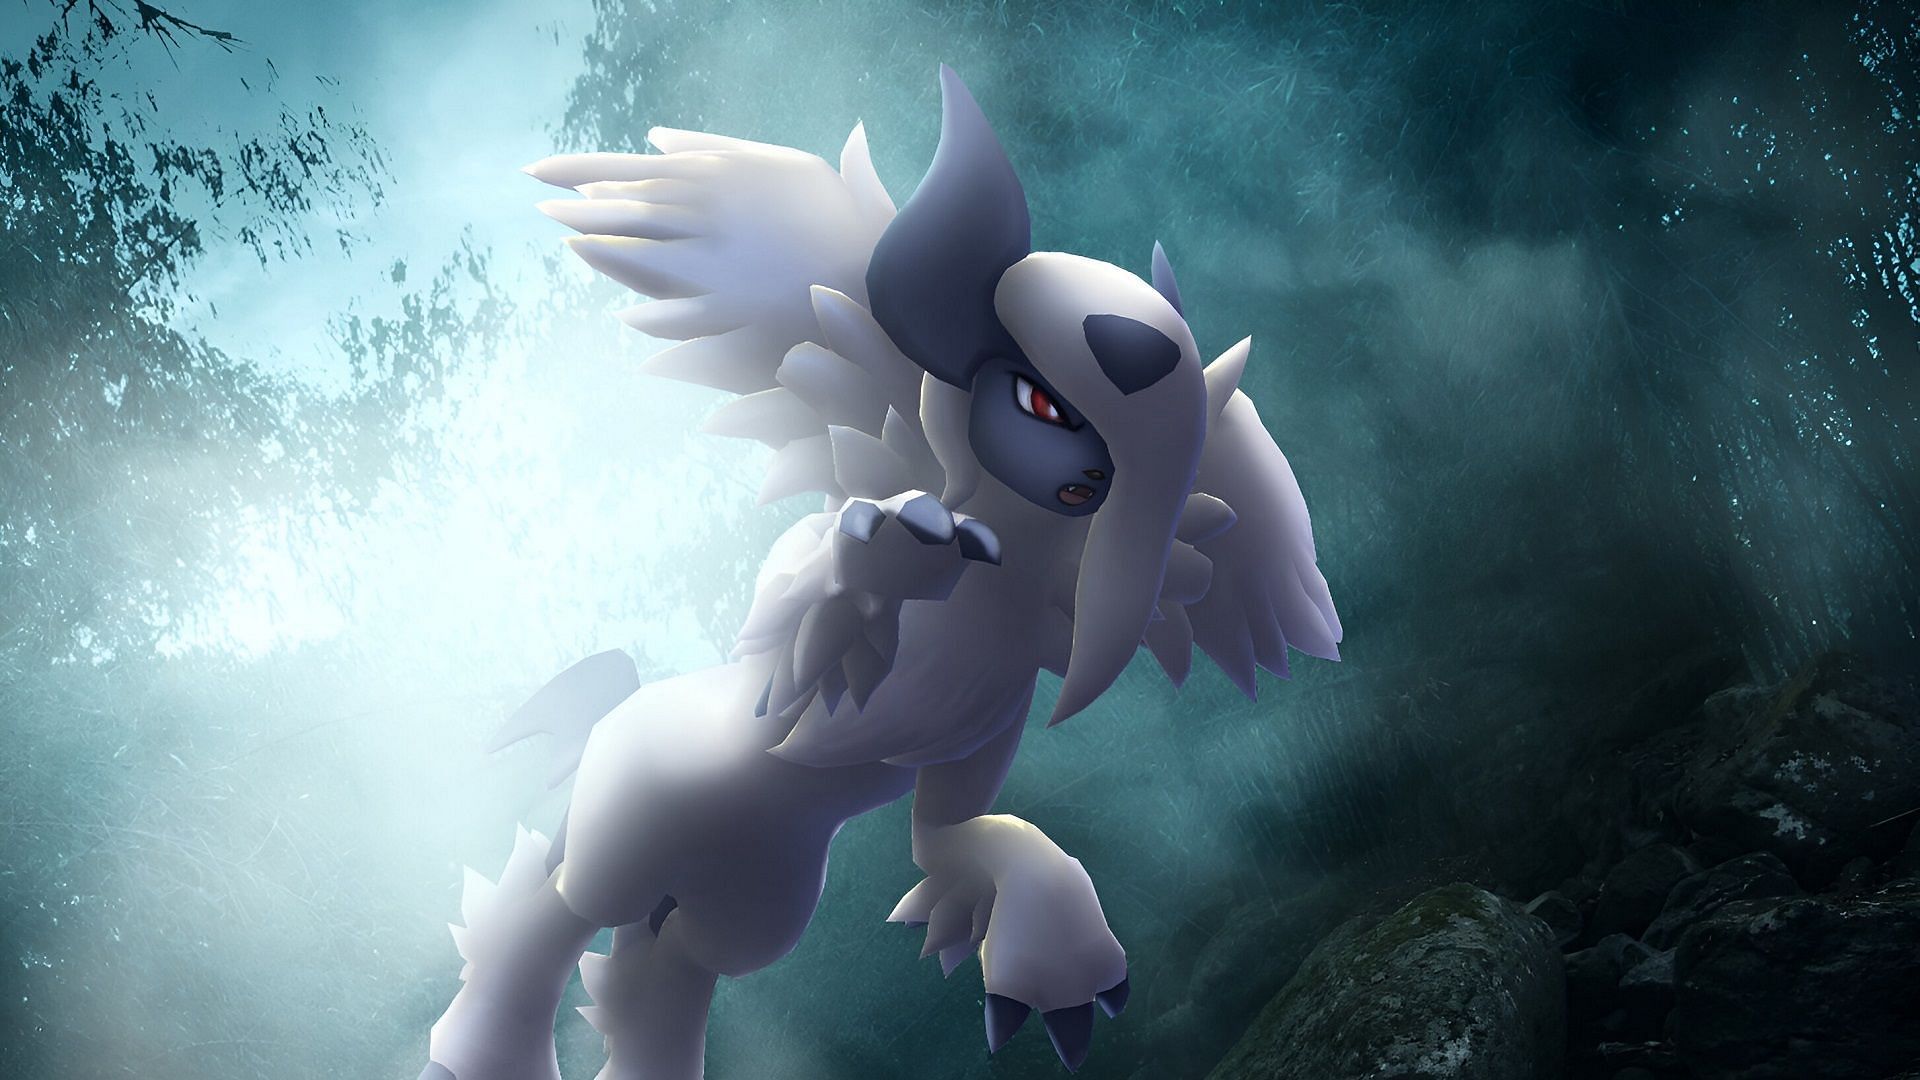 Mega Absol is a Dark-type counter that can finish Wyrdeer raids quickly in Pokemon GO (Image via Niantic)